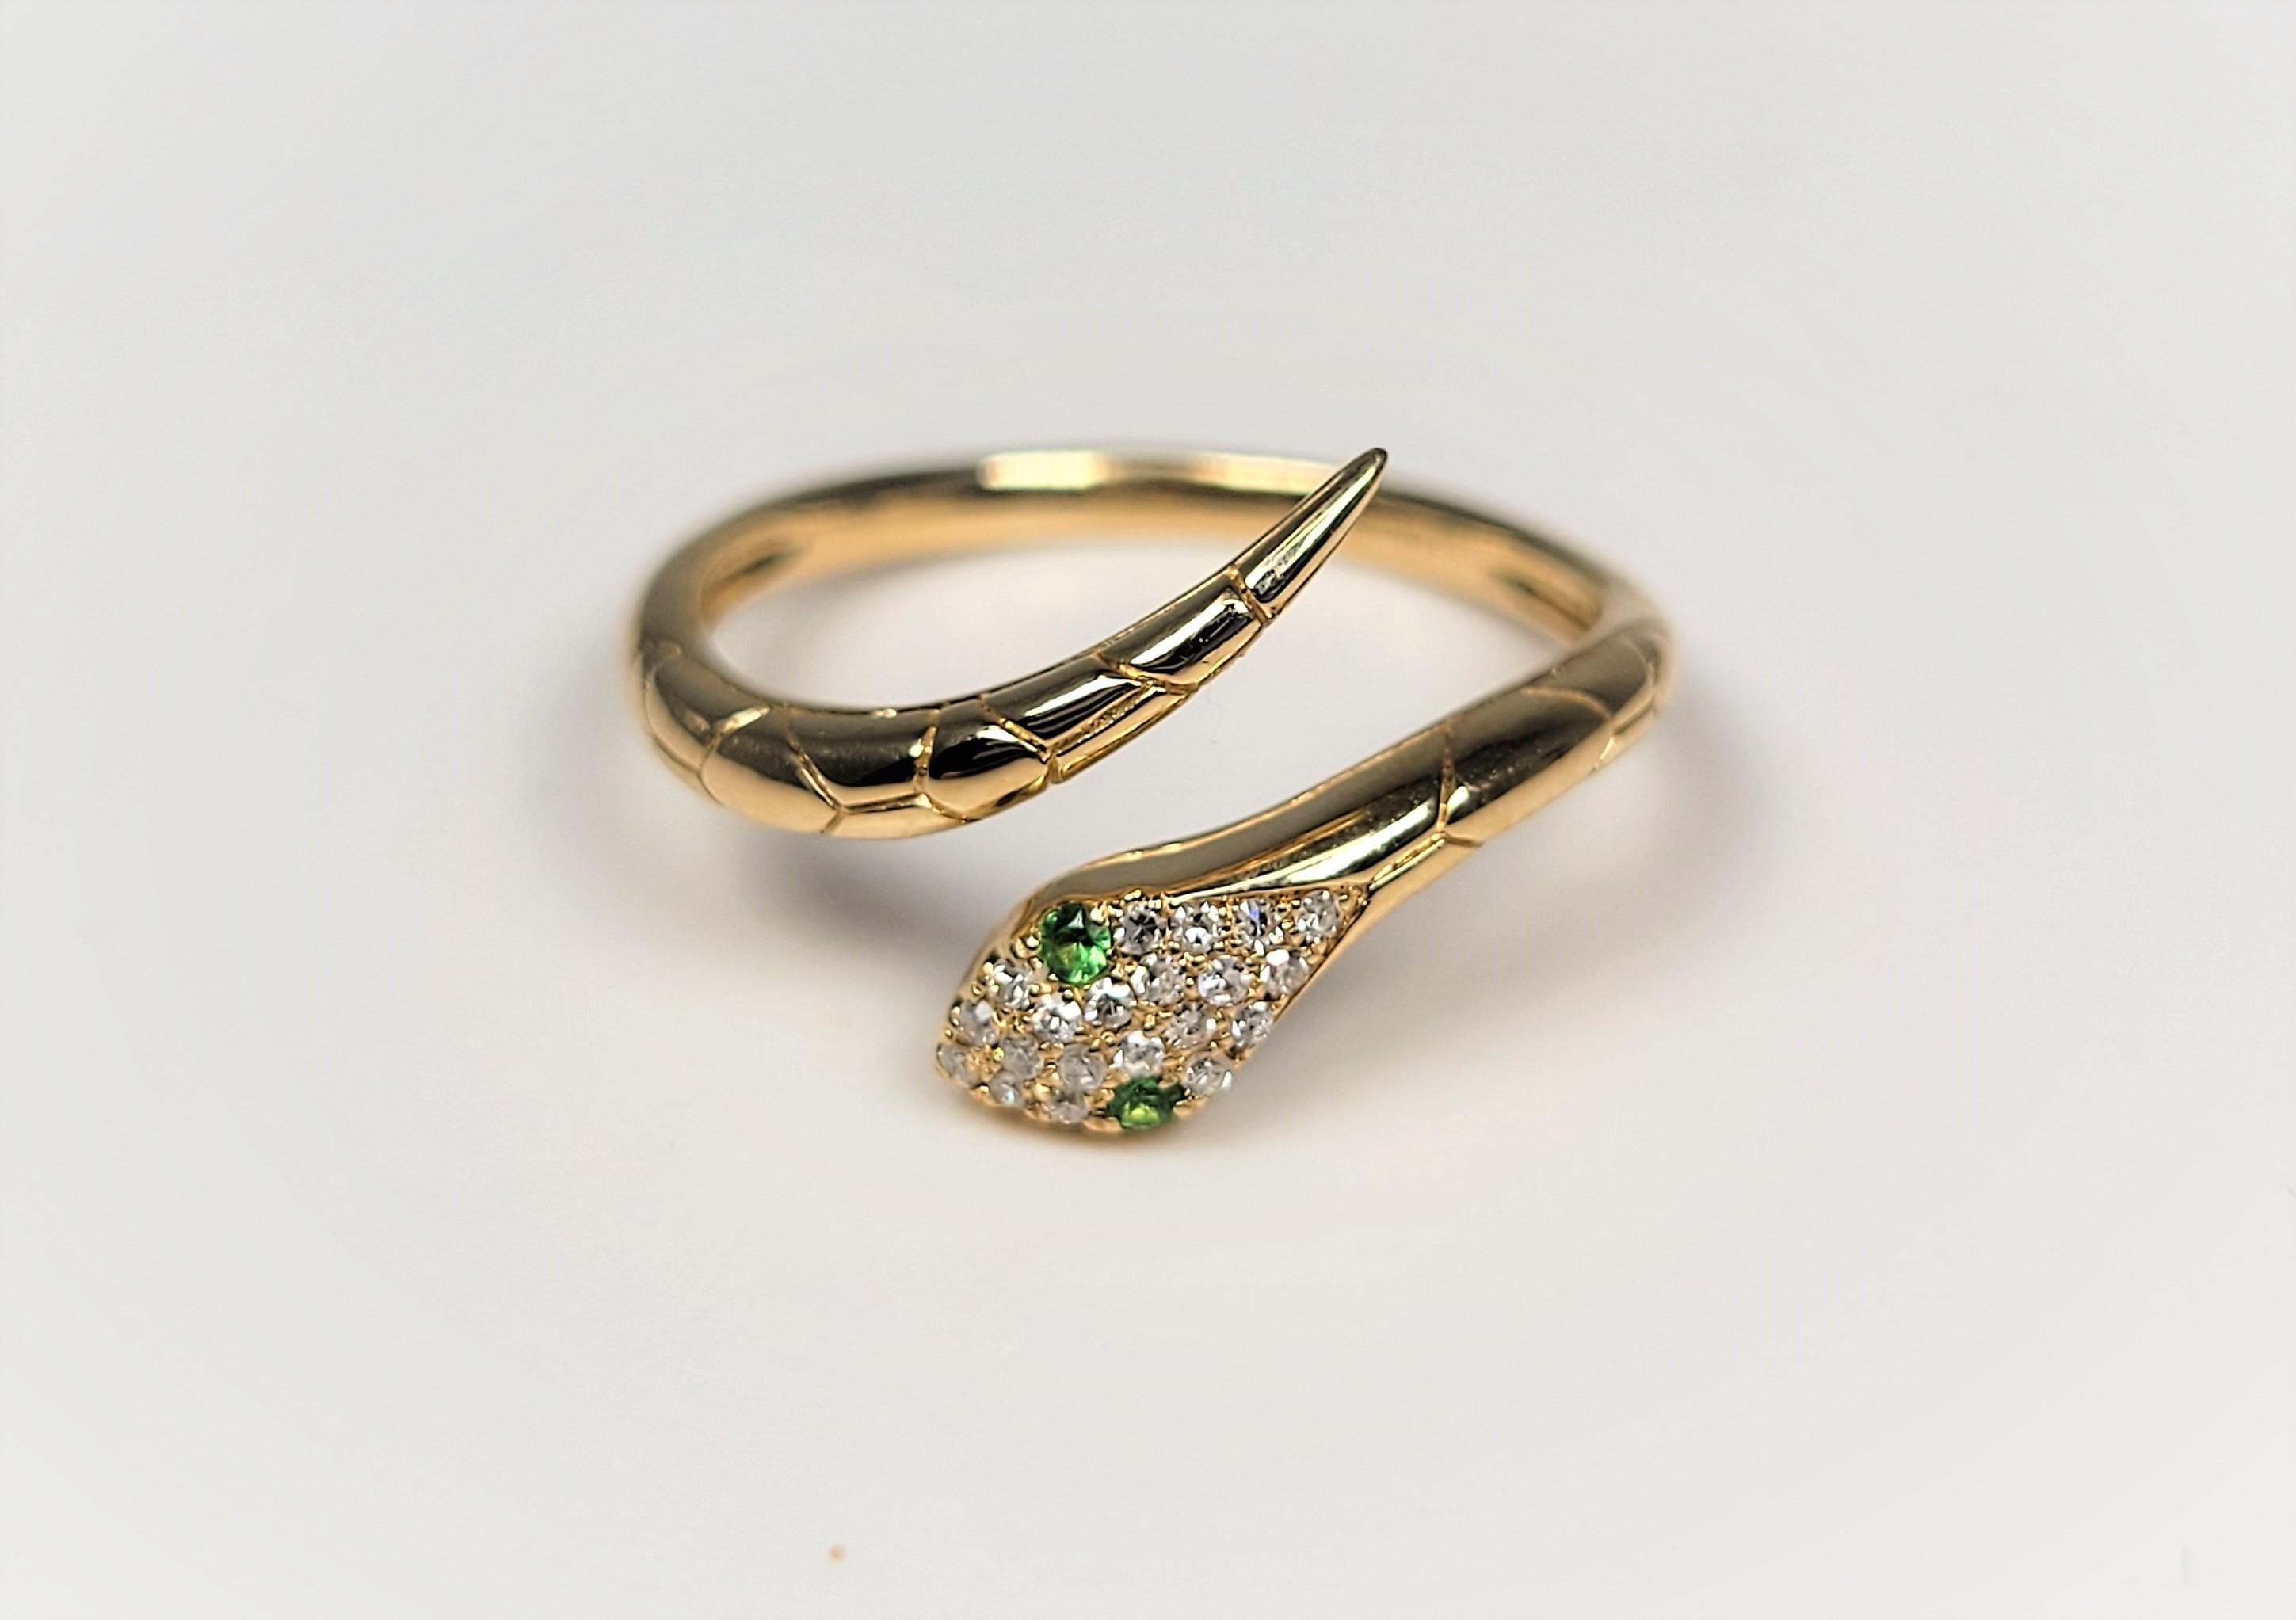 In 14 karat yellow gold, this fun diamond and tsavorite snake ring isn't just for the snake lover!